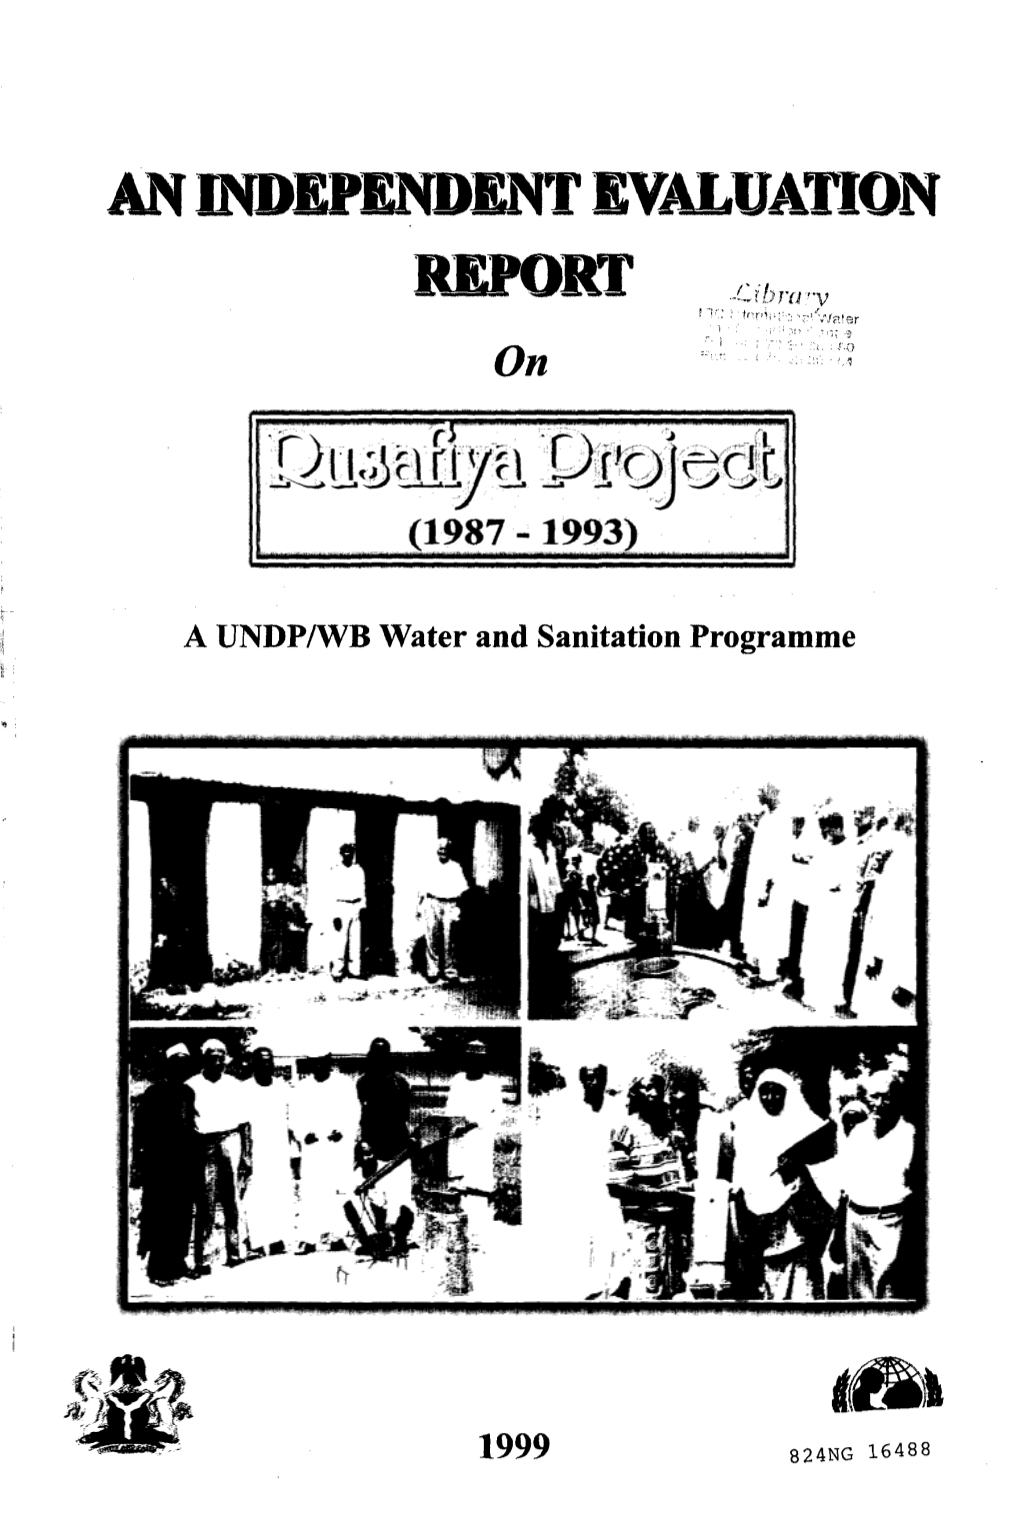 An Independent Evaluation Report on Rusafiya Project